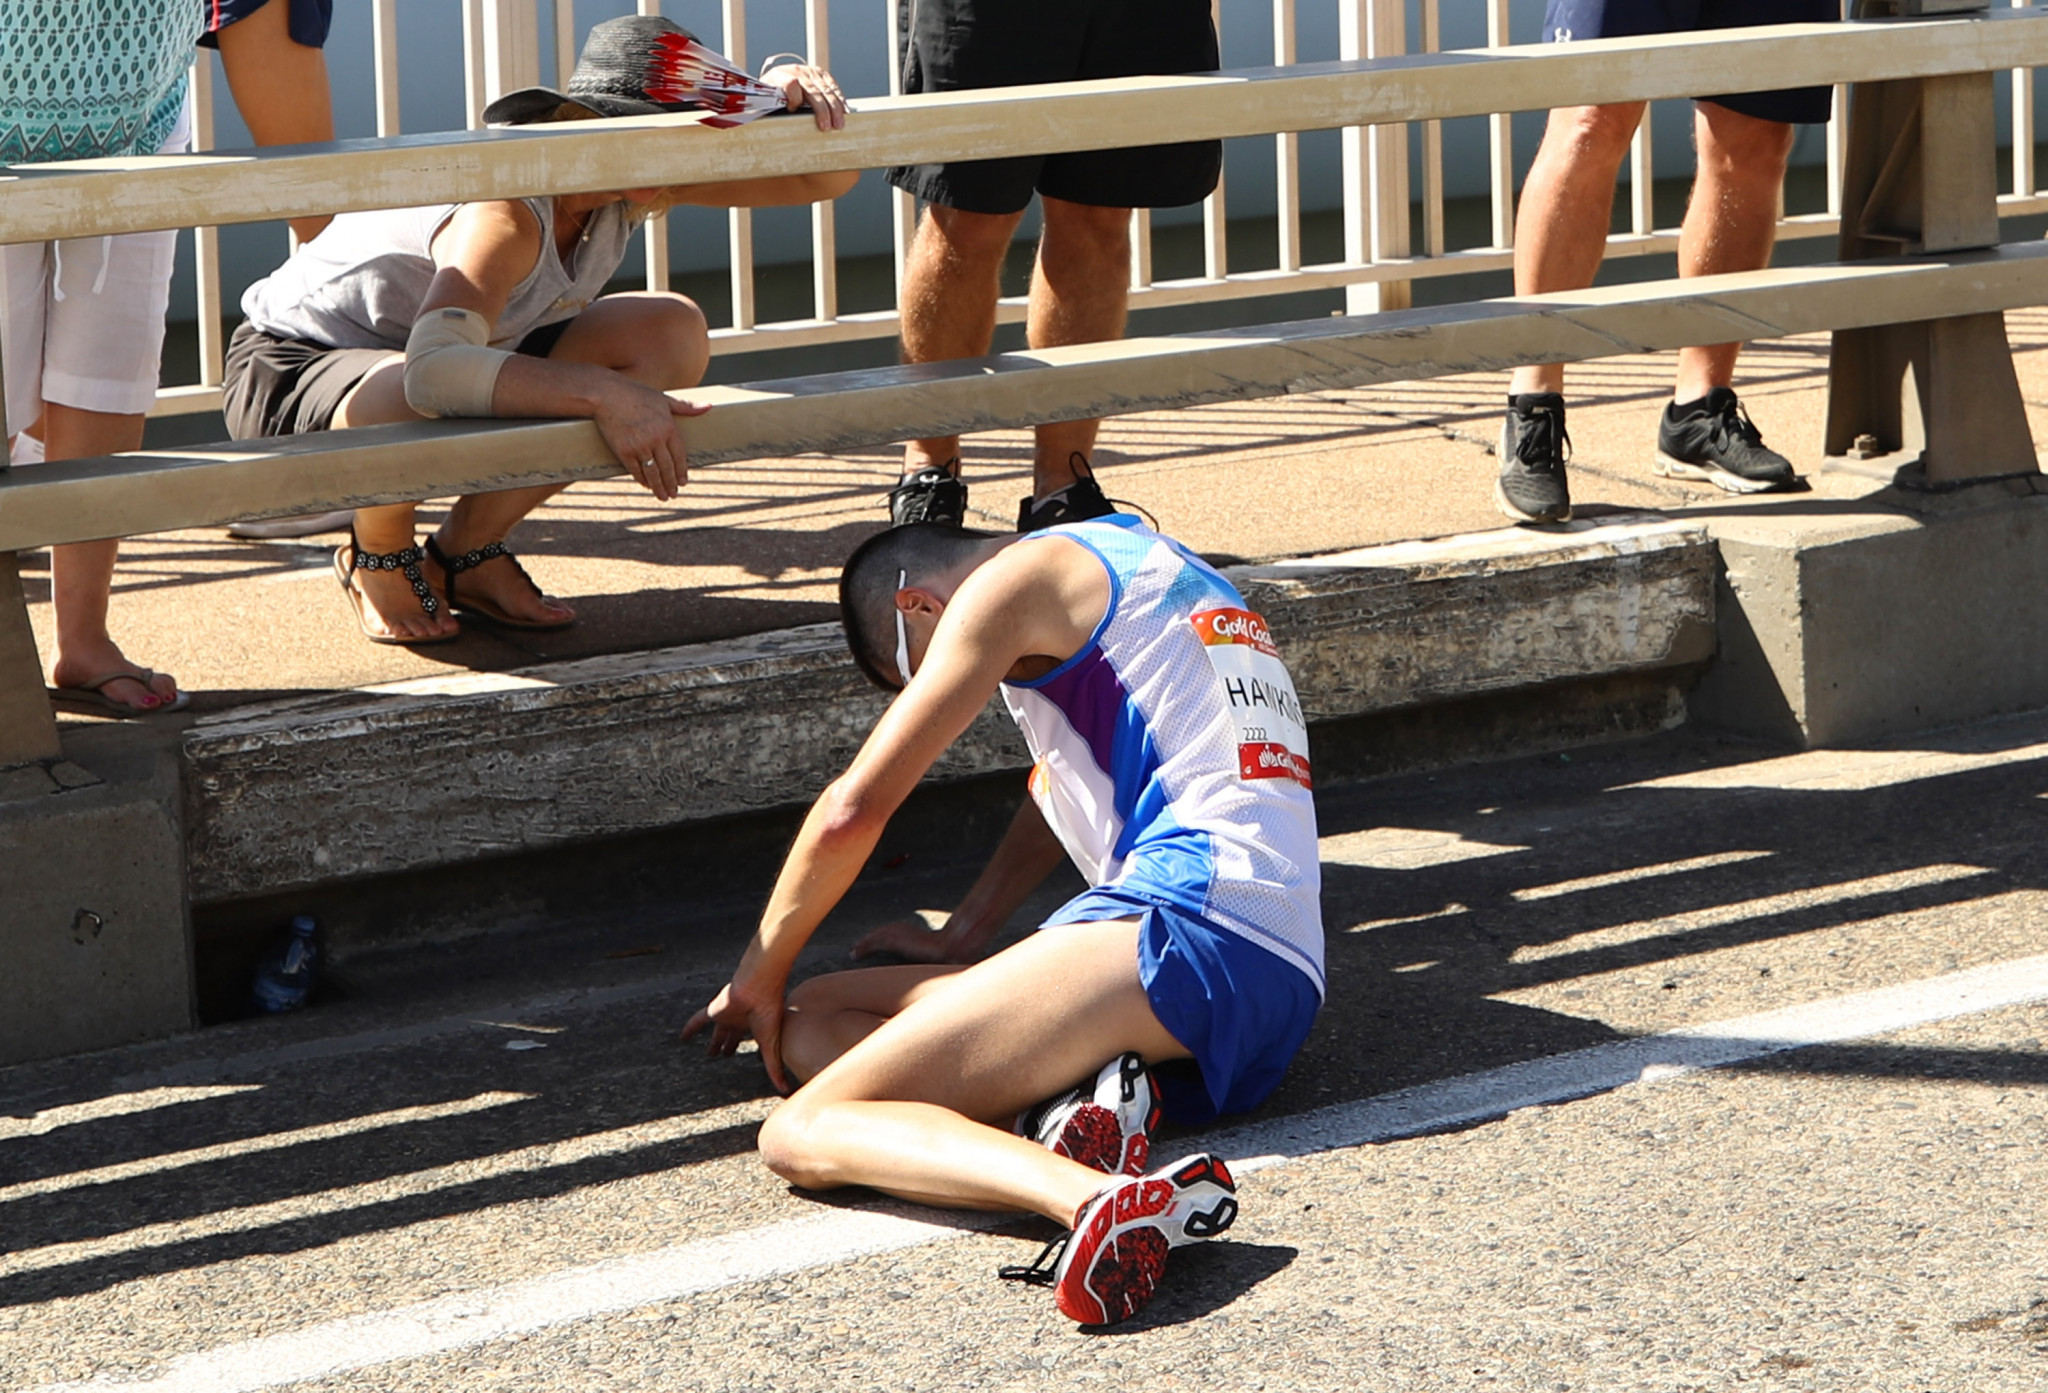 Disaster struck for Scotland's Callum Hawkins in the men's marathon when he collapsed in exhaustion in the closing stages in one of the most dramatic moments of Gold Coast 2018 ©Getty Images